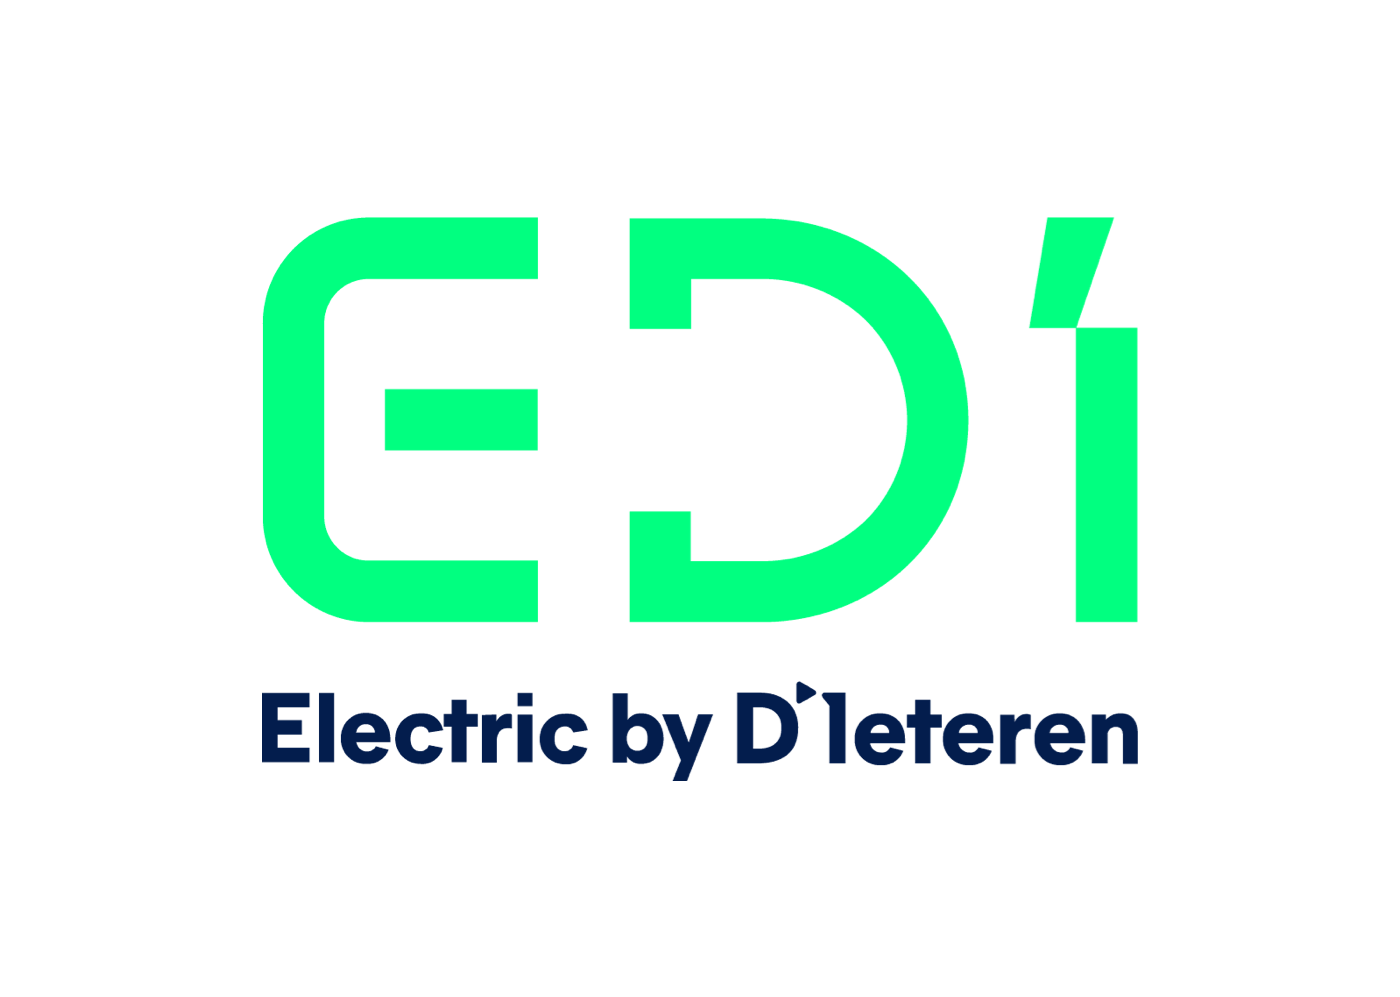 Logo of the companyElectric by D'Ieteren